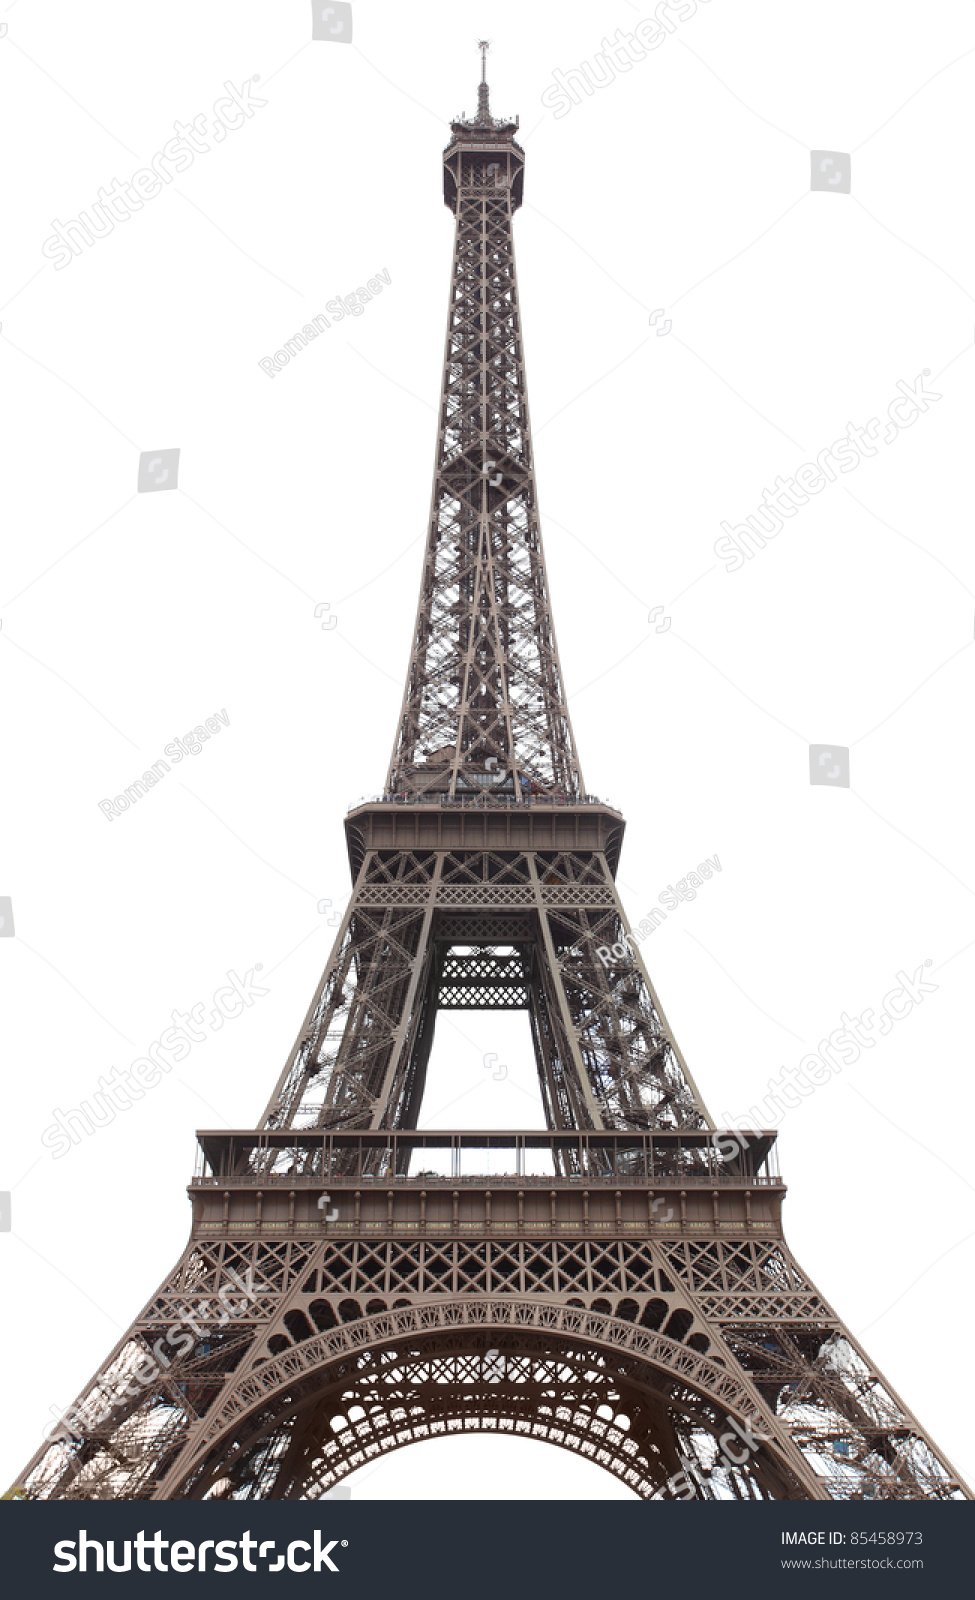 Eiffel tower isolated over the white background #85458973